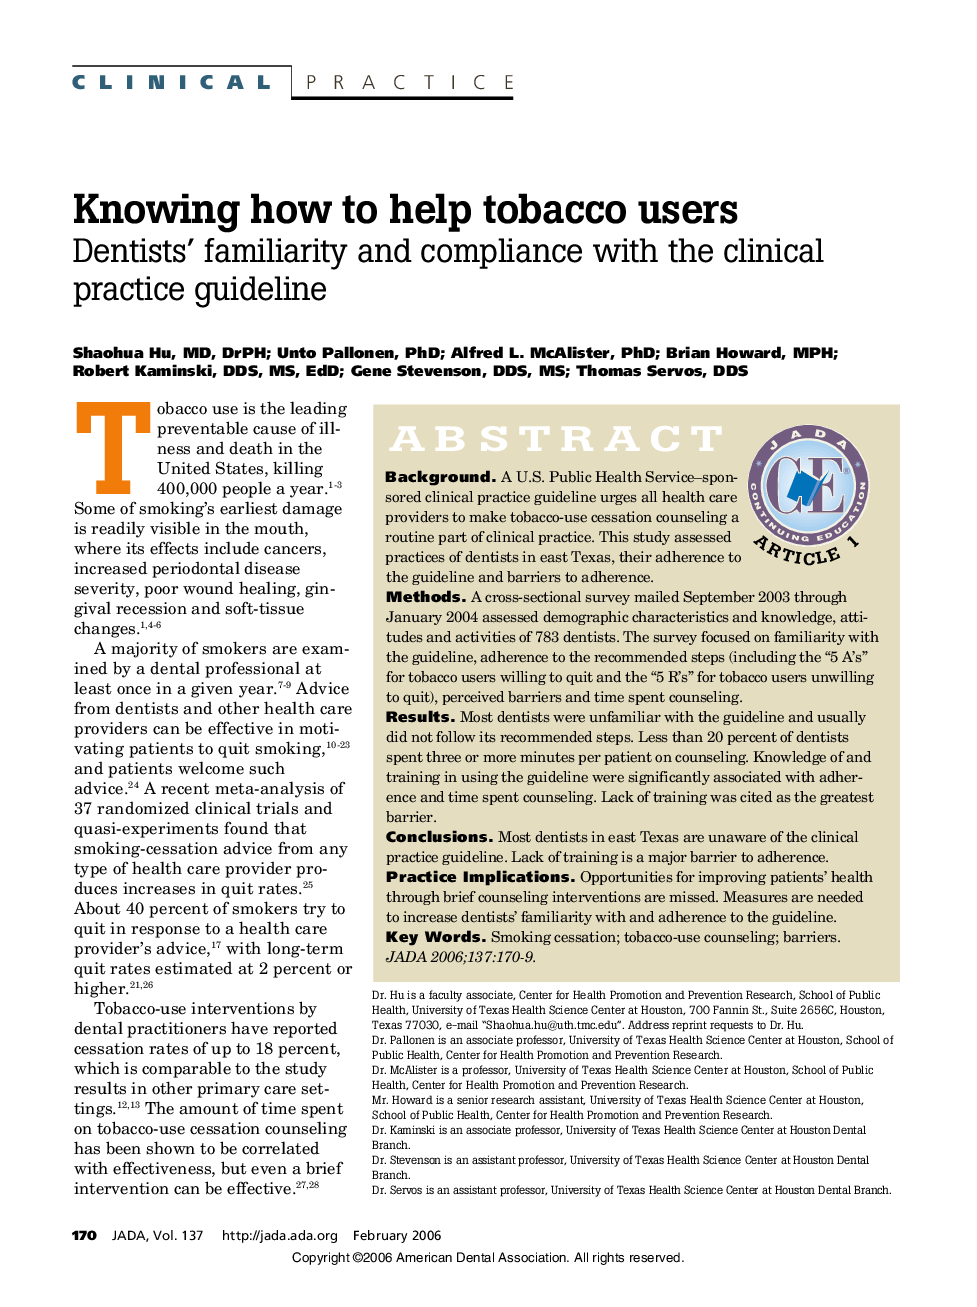 Knowing how to help tobacco users: Dentists' familiarity and compliance with the clinical practice guideline